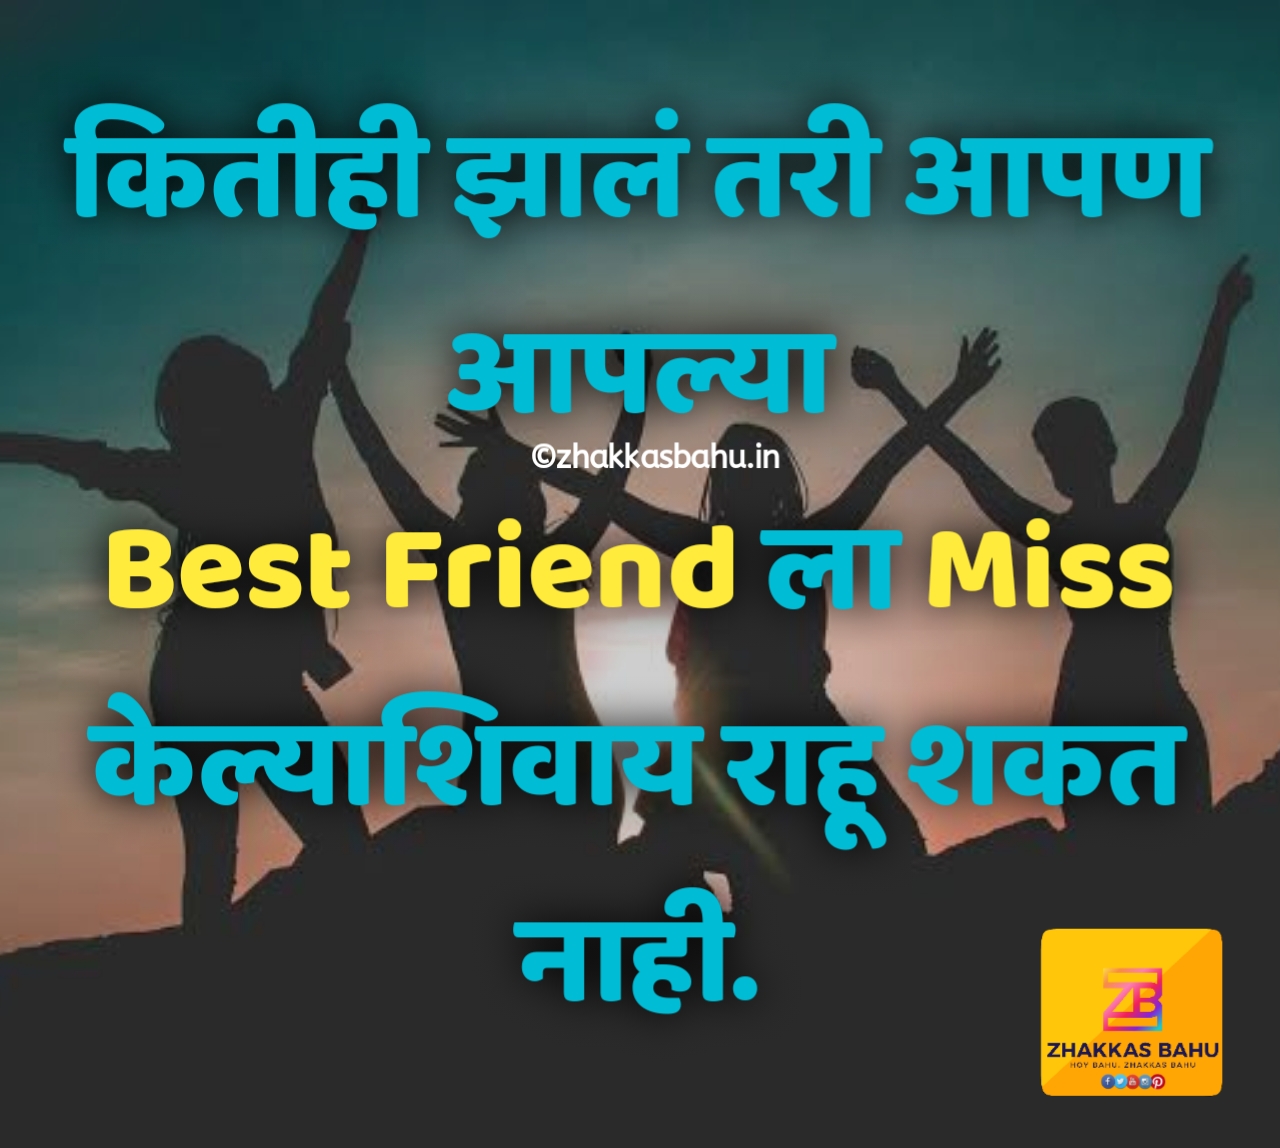 friendship images with messages in marathi